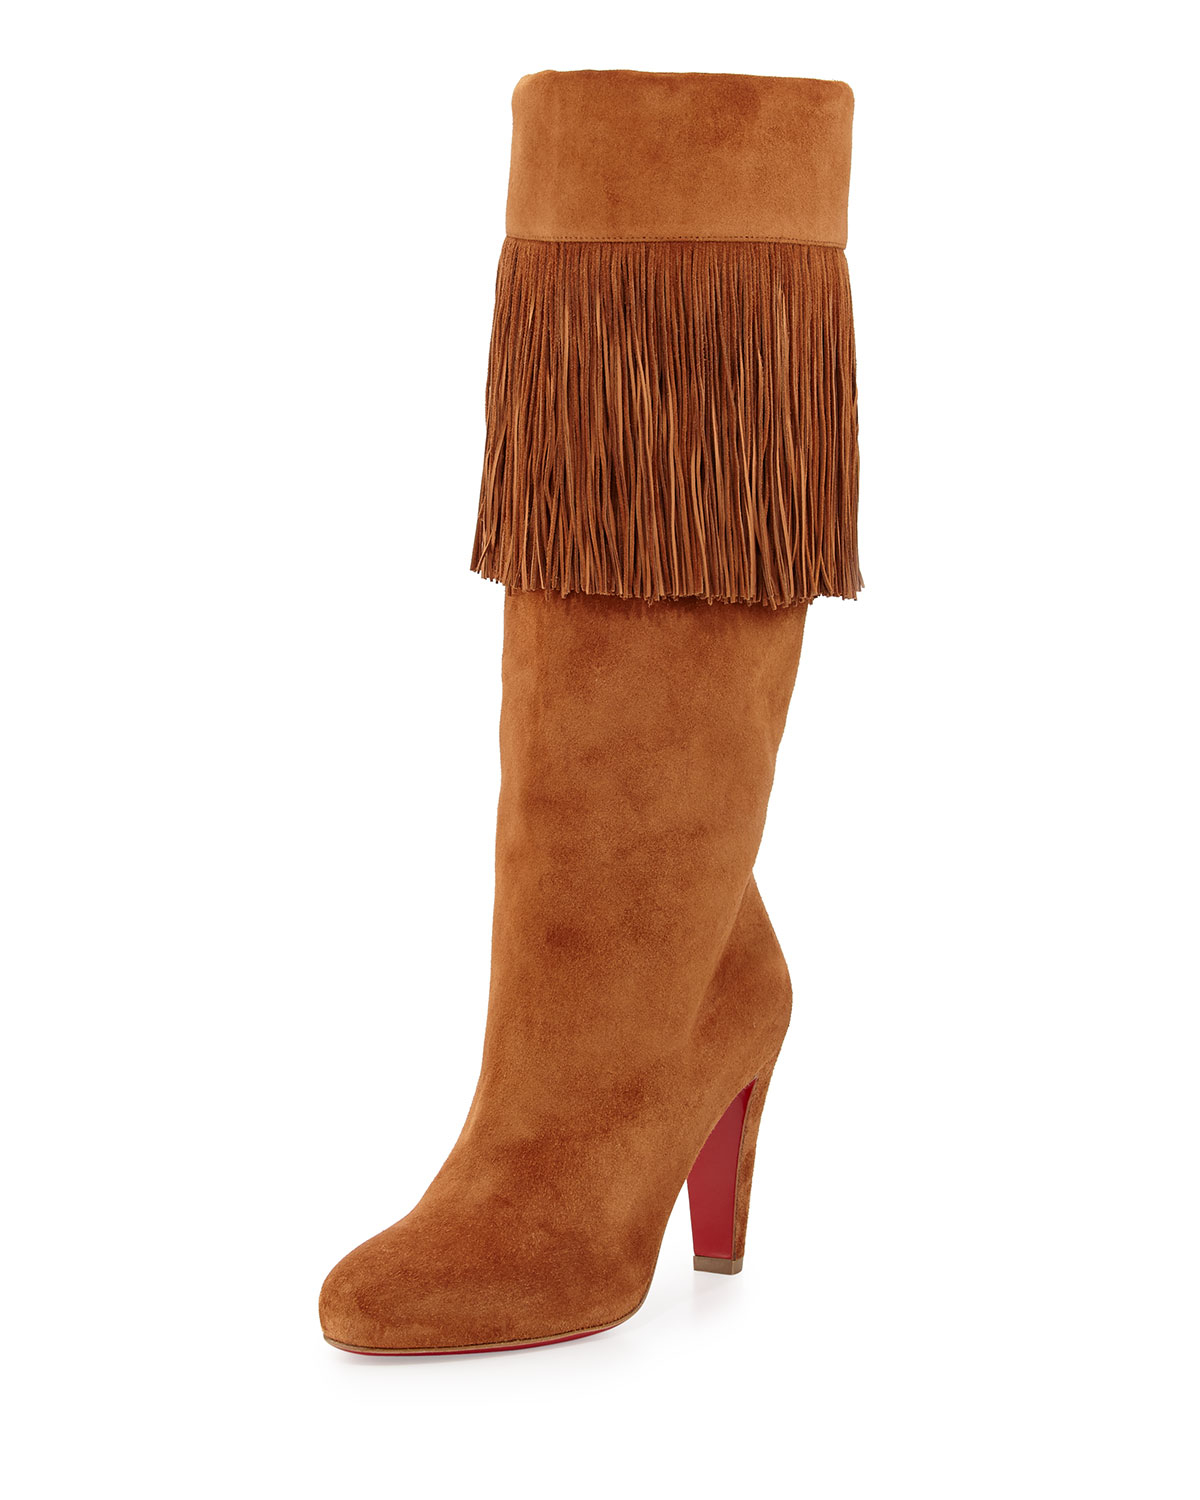 Peony Design ? christian louboutin brown fringe boots